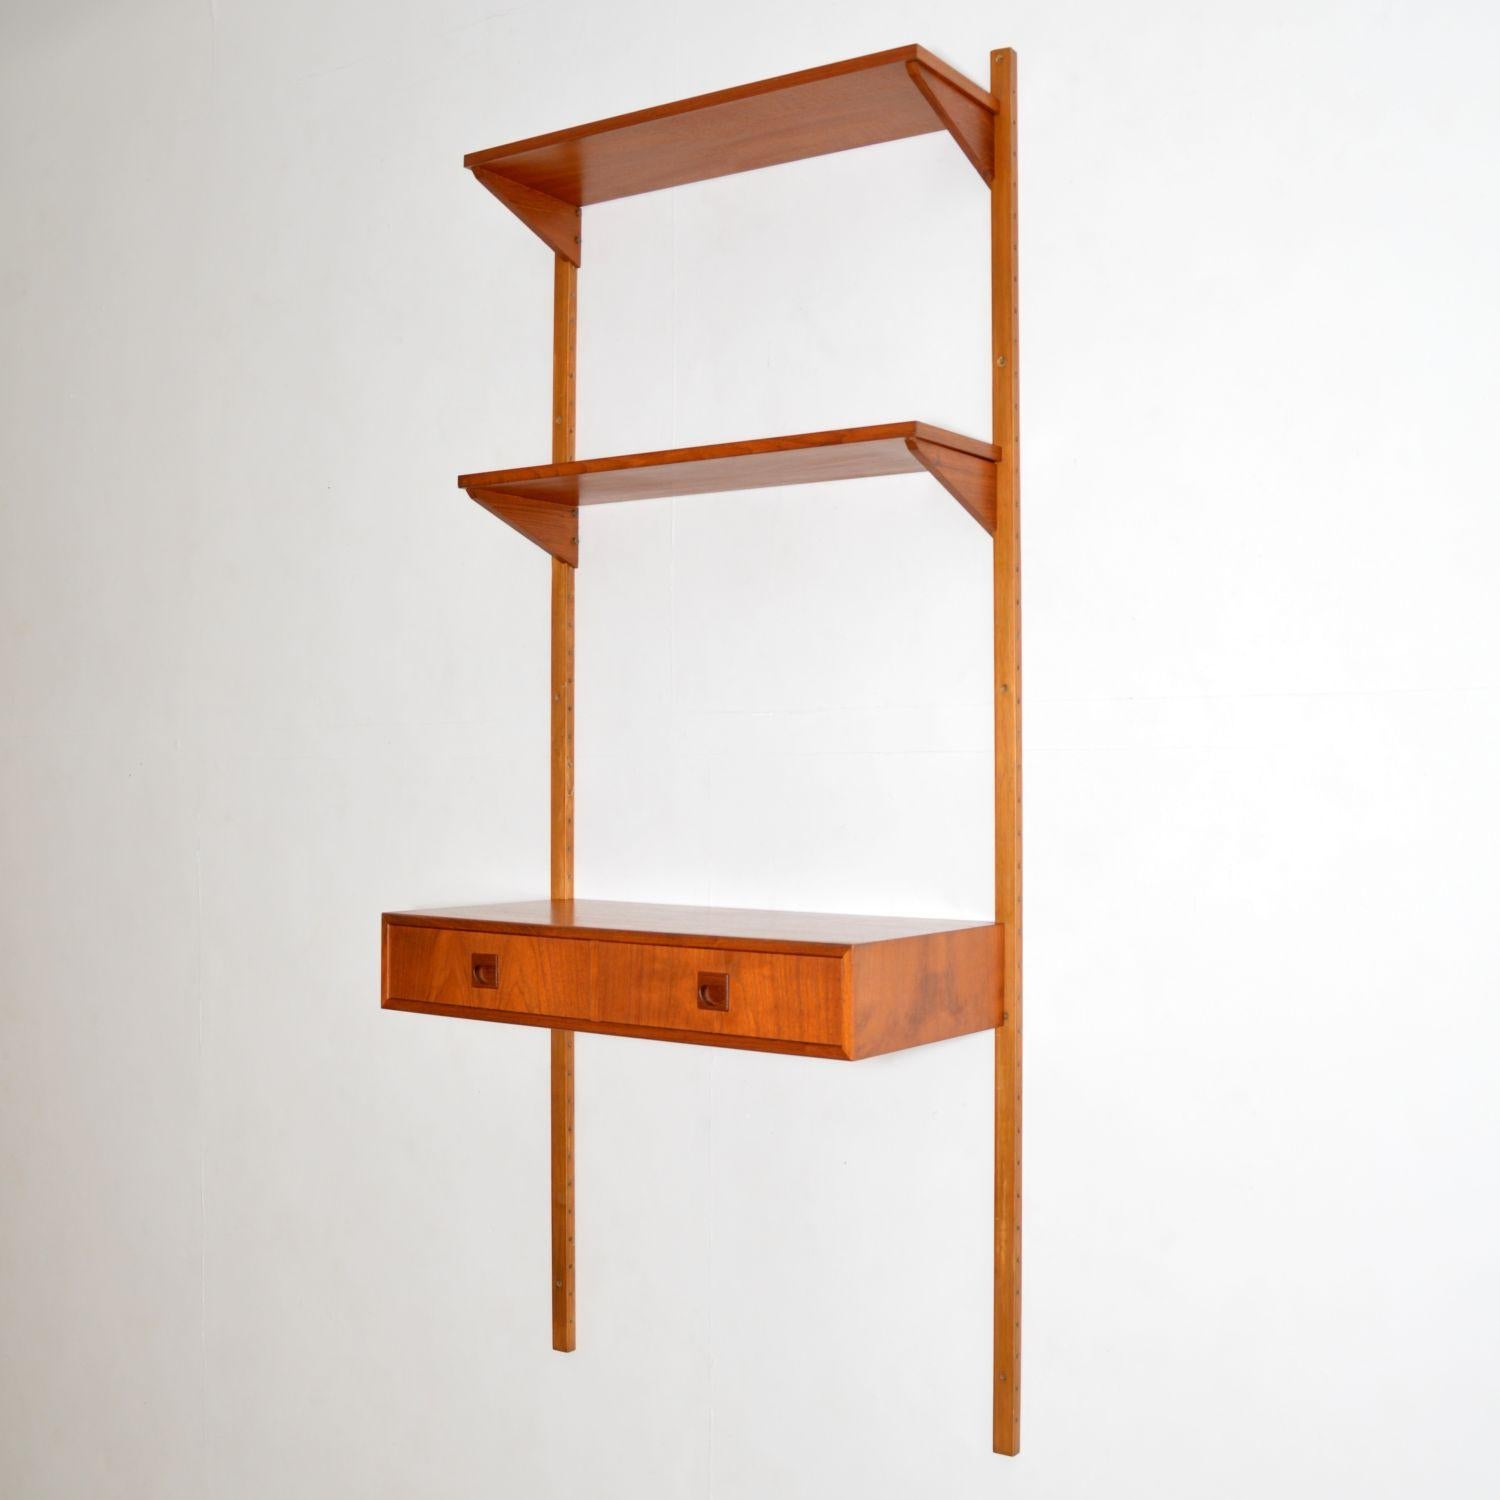 A stylish and versatile teak wall mounting cabinet with desk. This is the PS system, made in Denmark in the 1960s.

This single bay consists of a two drawer desk section, two chevron supported shelves, and two long wall mounting rails.

This is